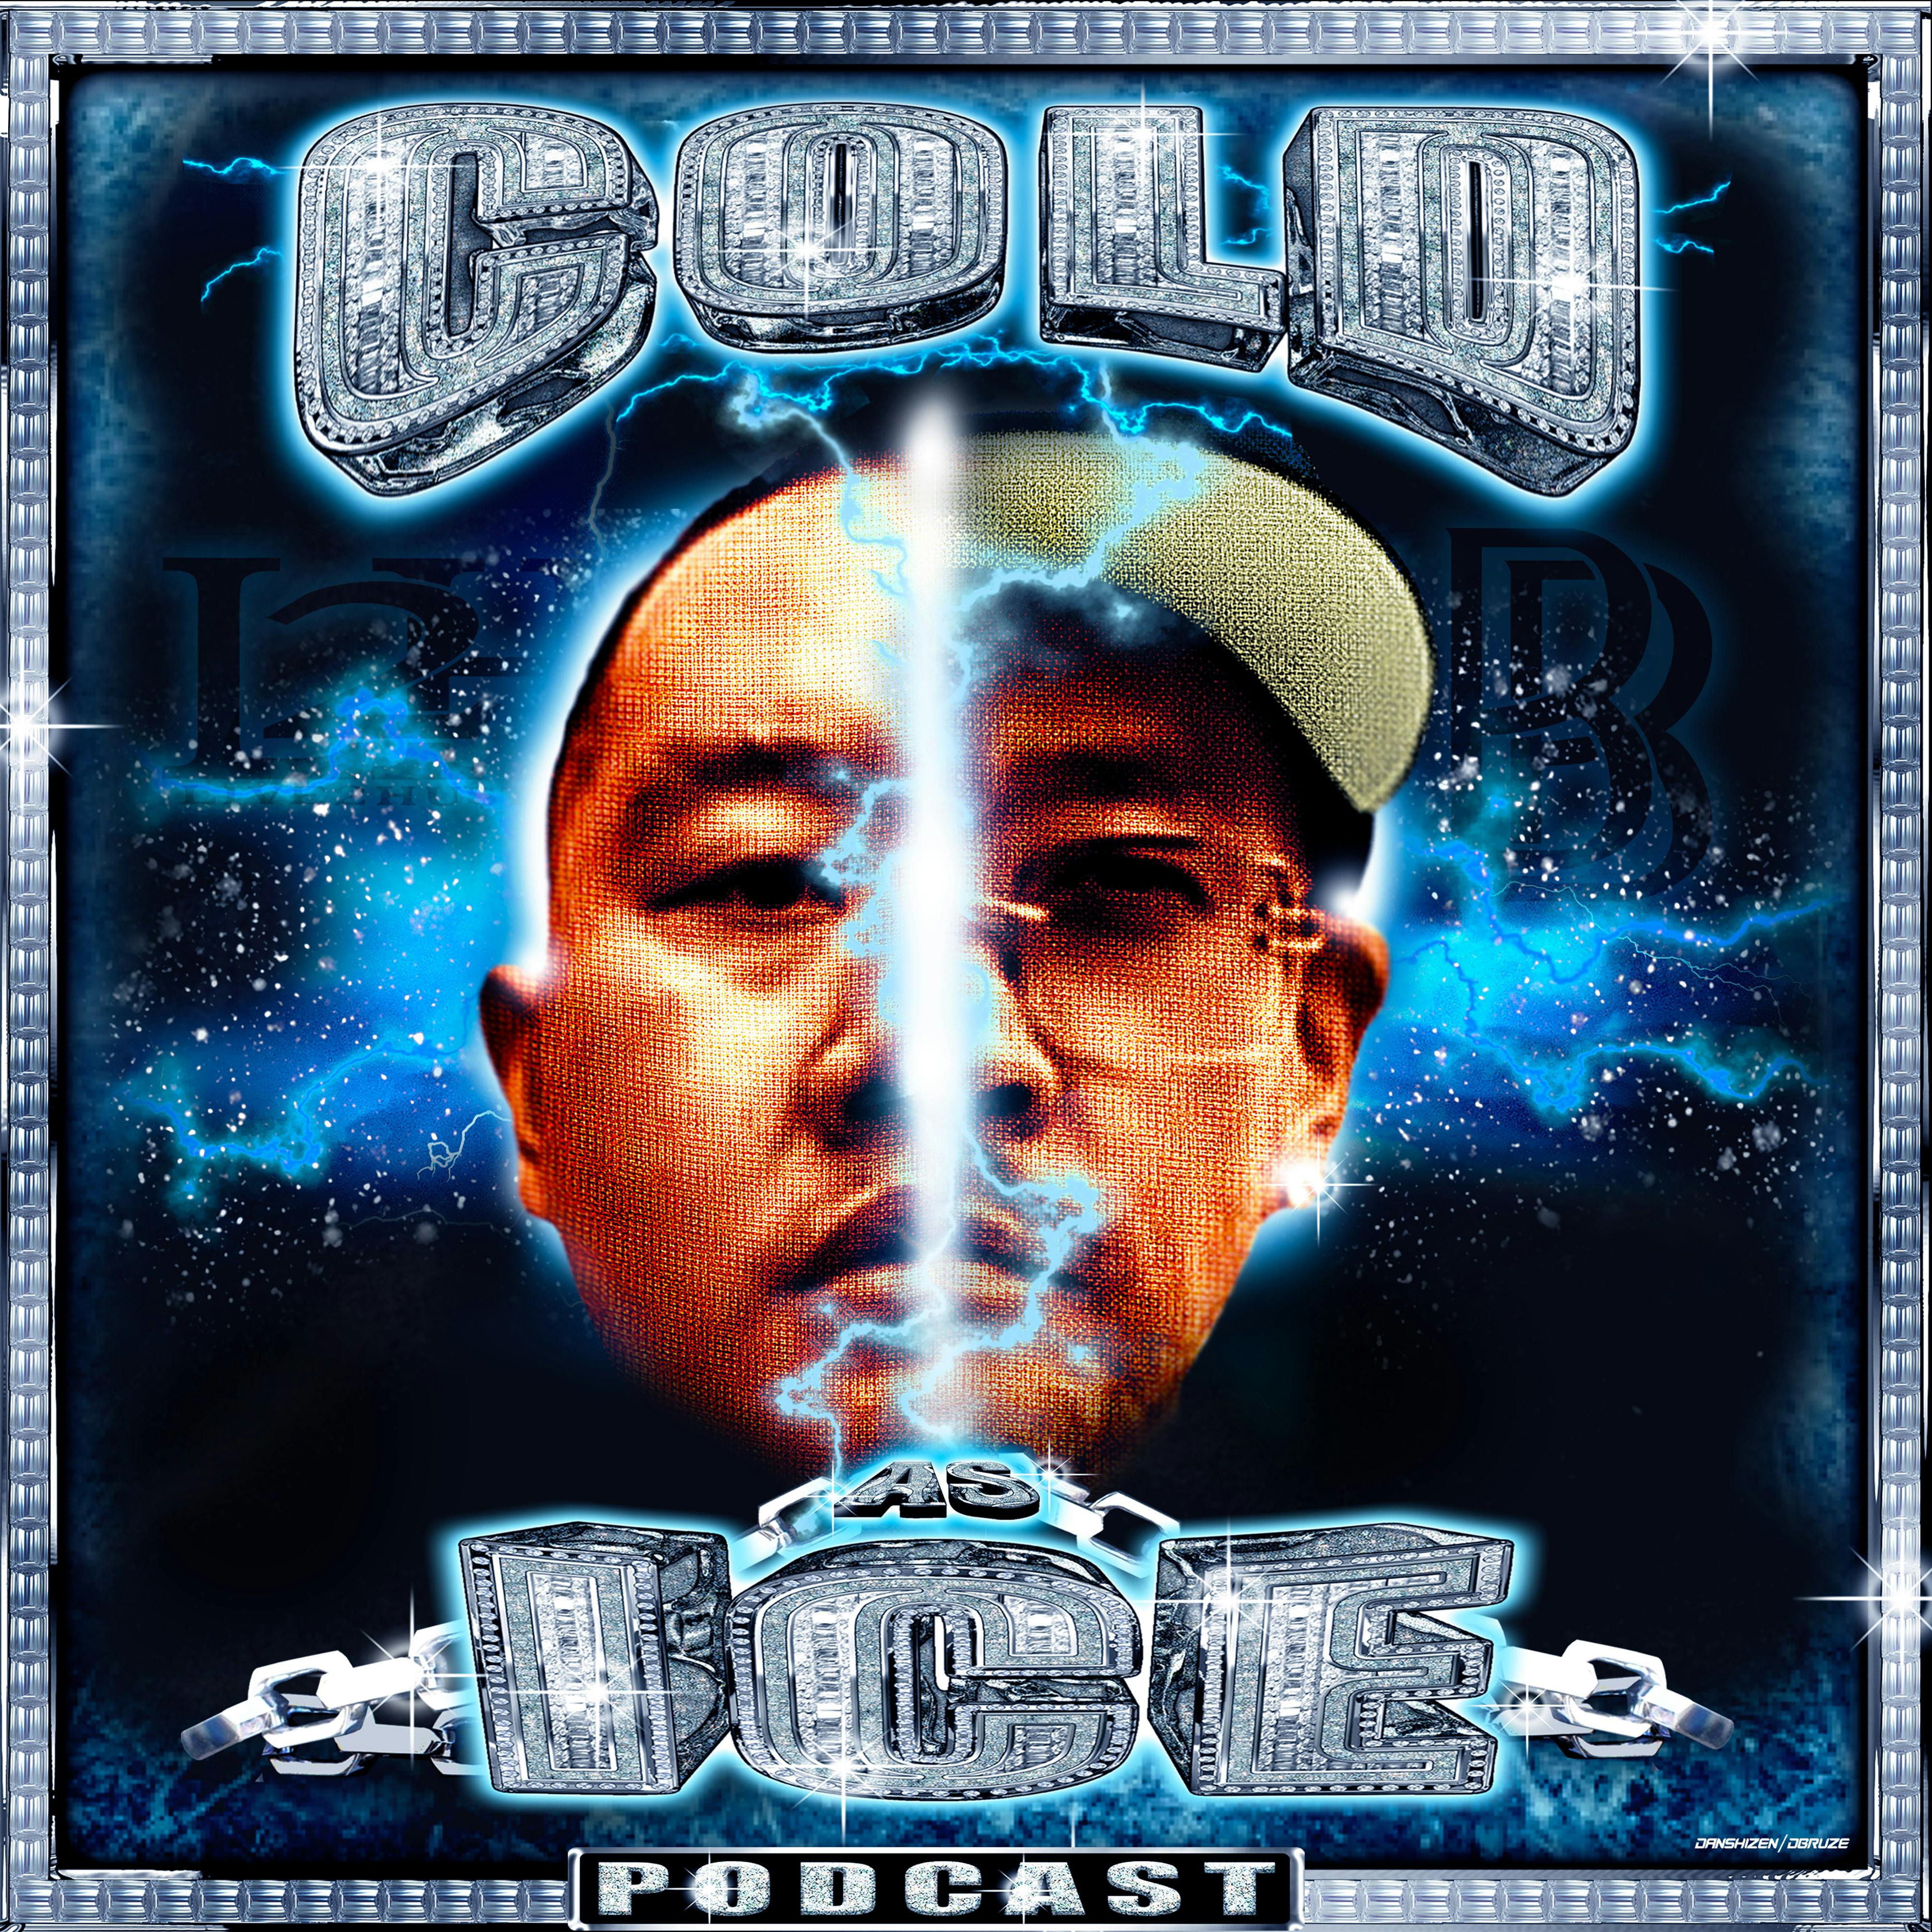 COLD AS ICE EP 003 - NEVER ADDRESS PEASANTS THROWING TOMATOES AT YOUR CHARIOT ft. Ben Baller & Jimmy The Gent